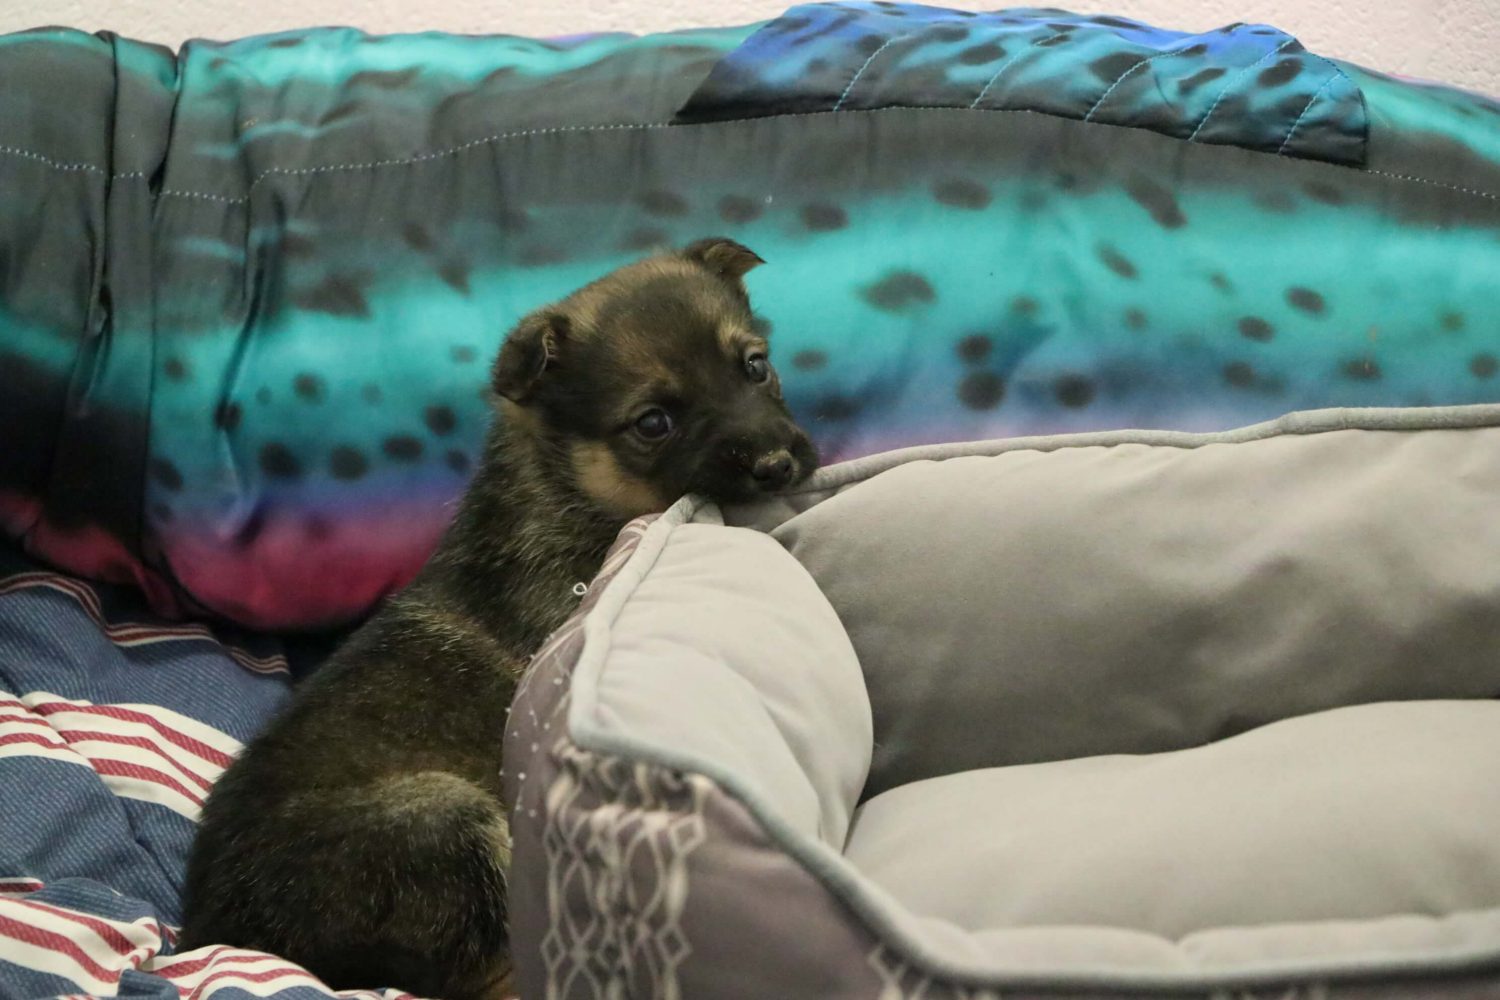 Appealing for Public’s Help After Puppies Abandoned in Calgary Store Parking Lot